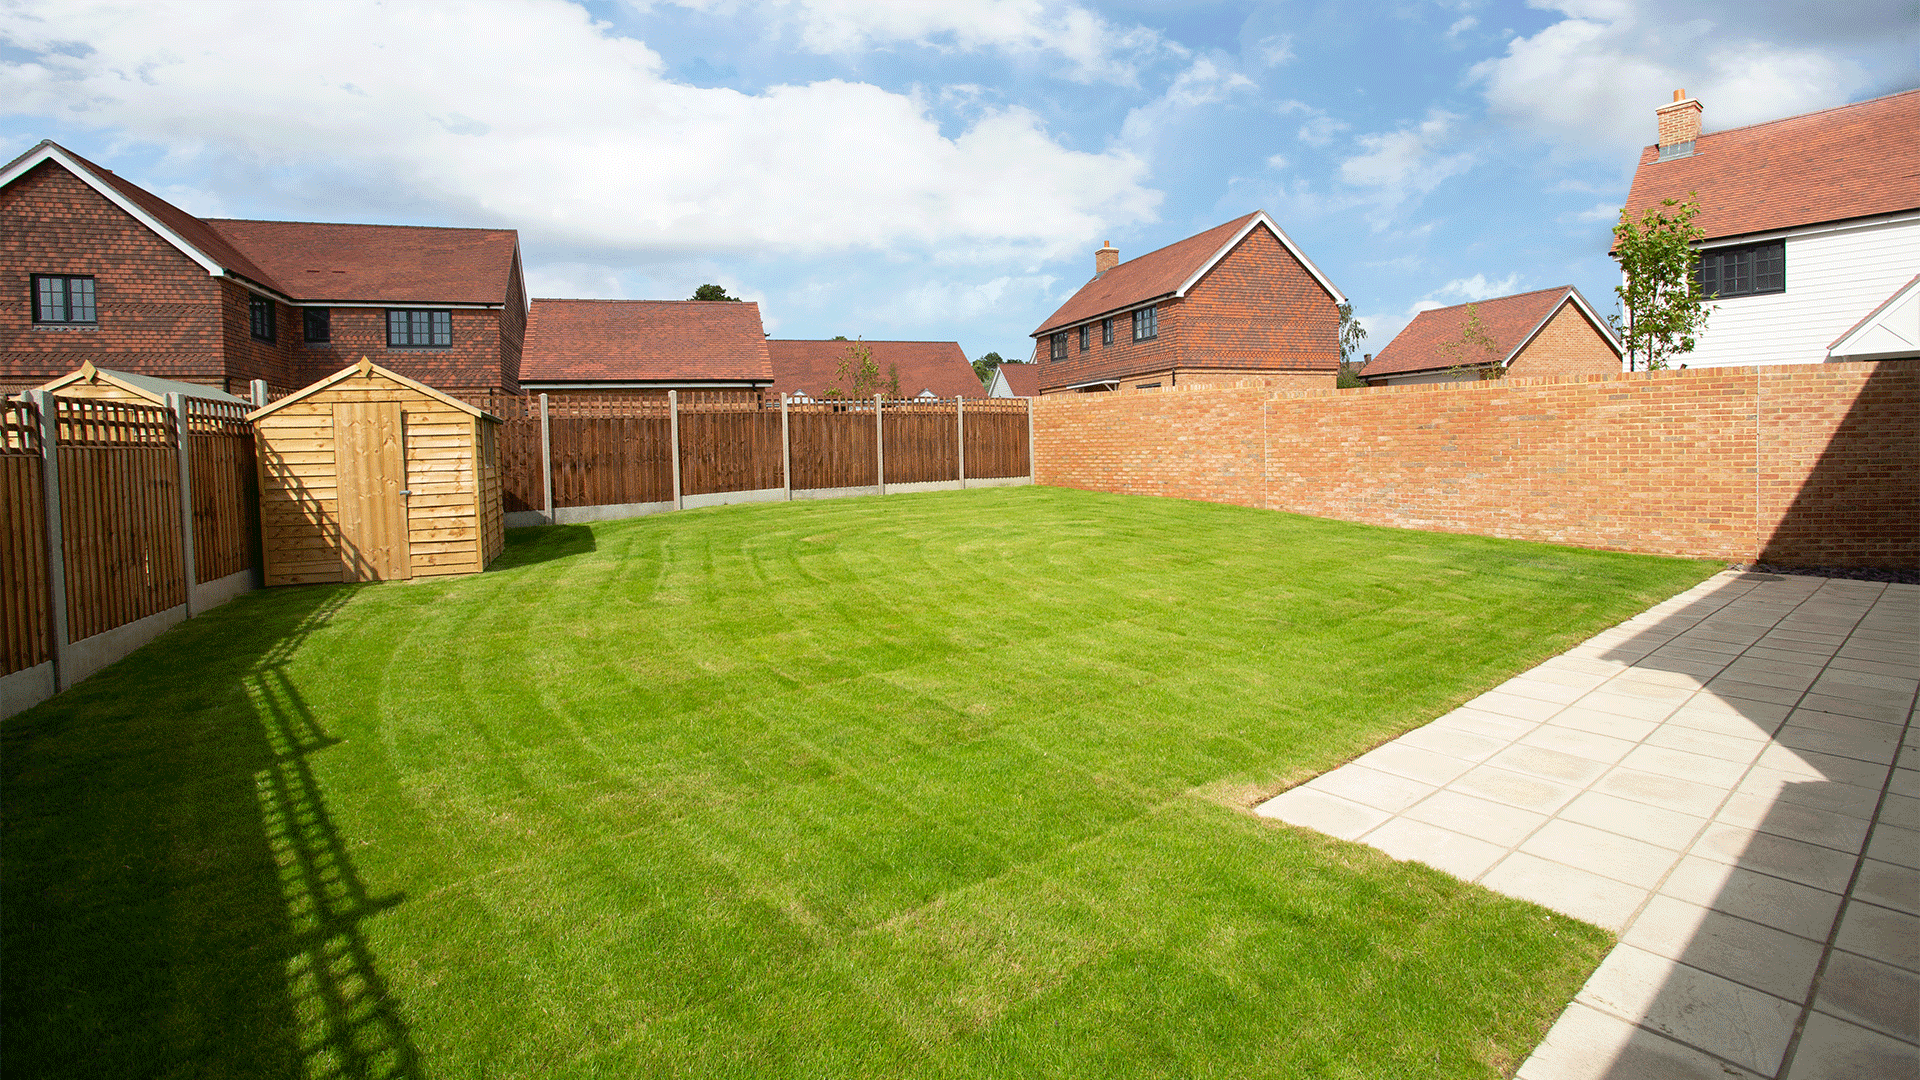 3 bedroom detached house landscaped garden at Miller's Meadow with a shed